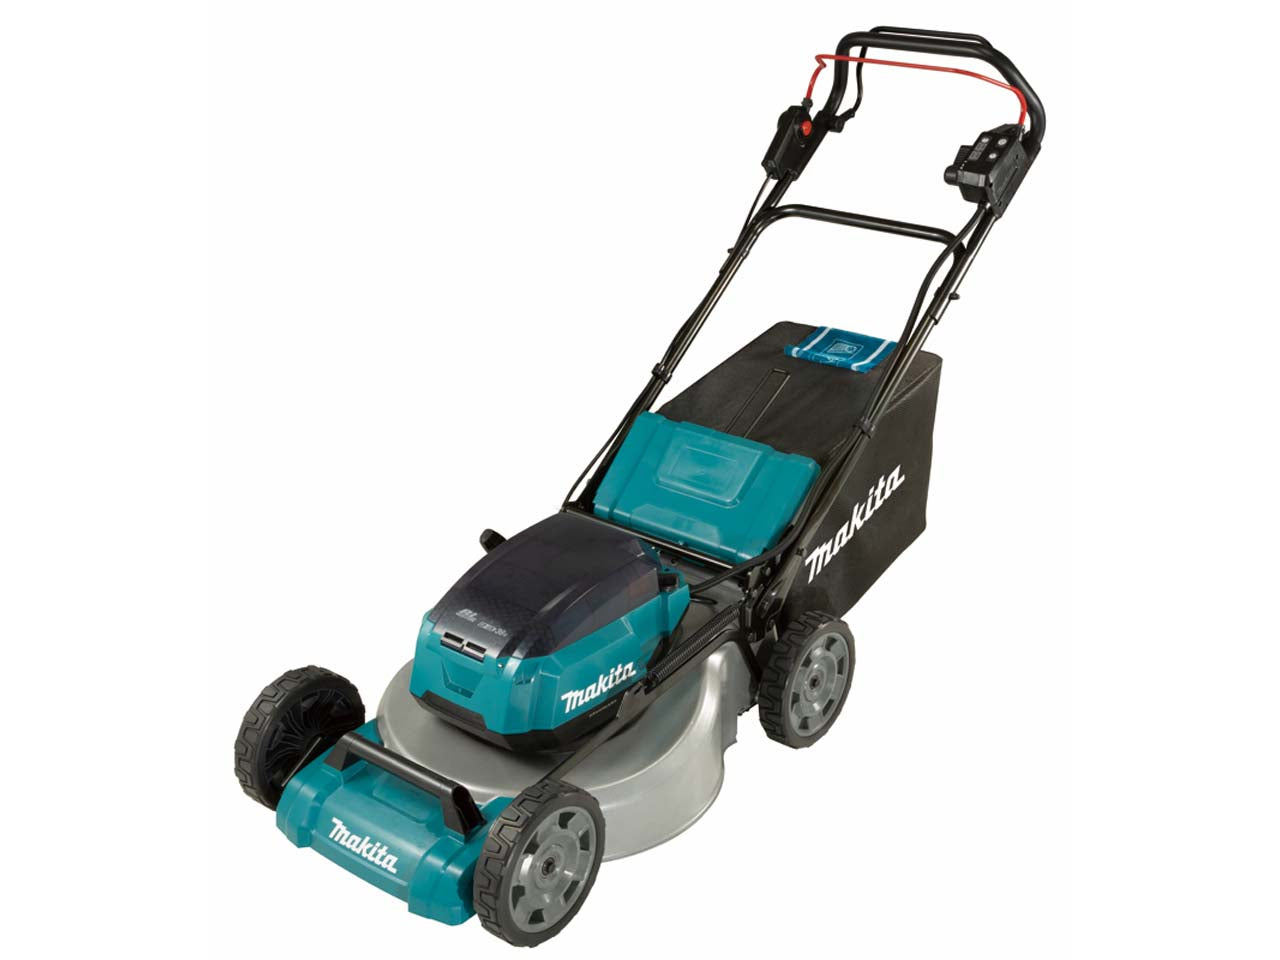 Makita DLM462PT4 36V Brushless Lawn Mower 460mm with 4 x 5.0Ah Batteries & Charger